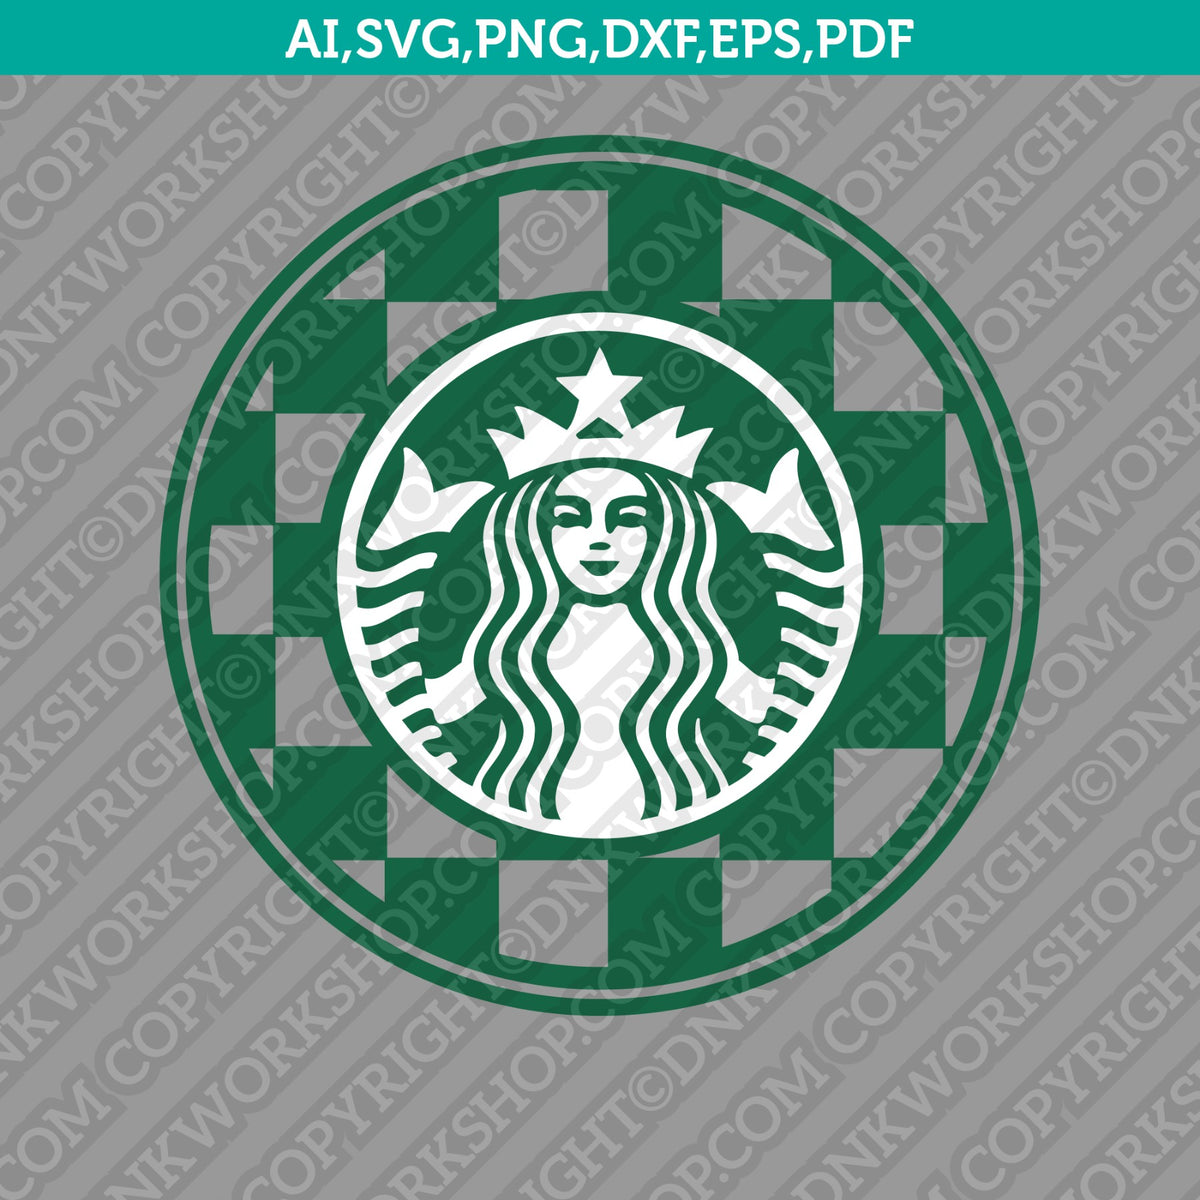 Louis Vuitton Svg for Starbucks Cup -  UK